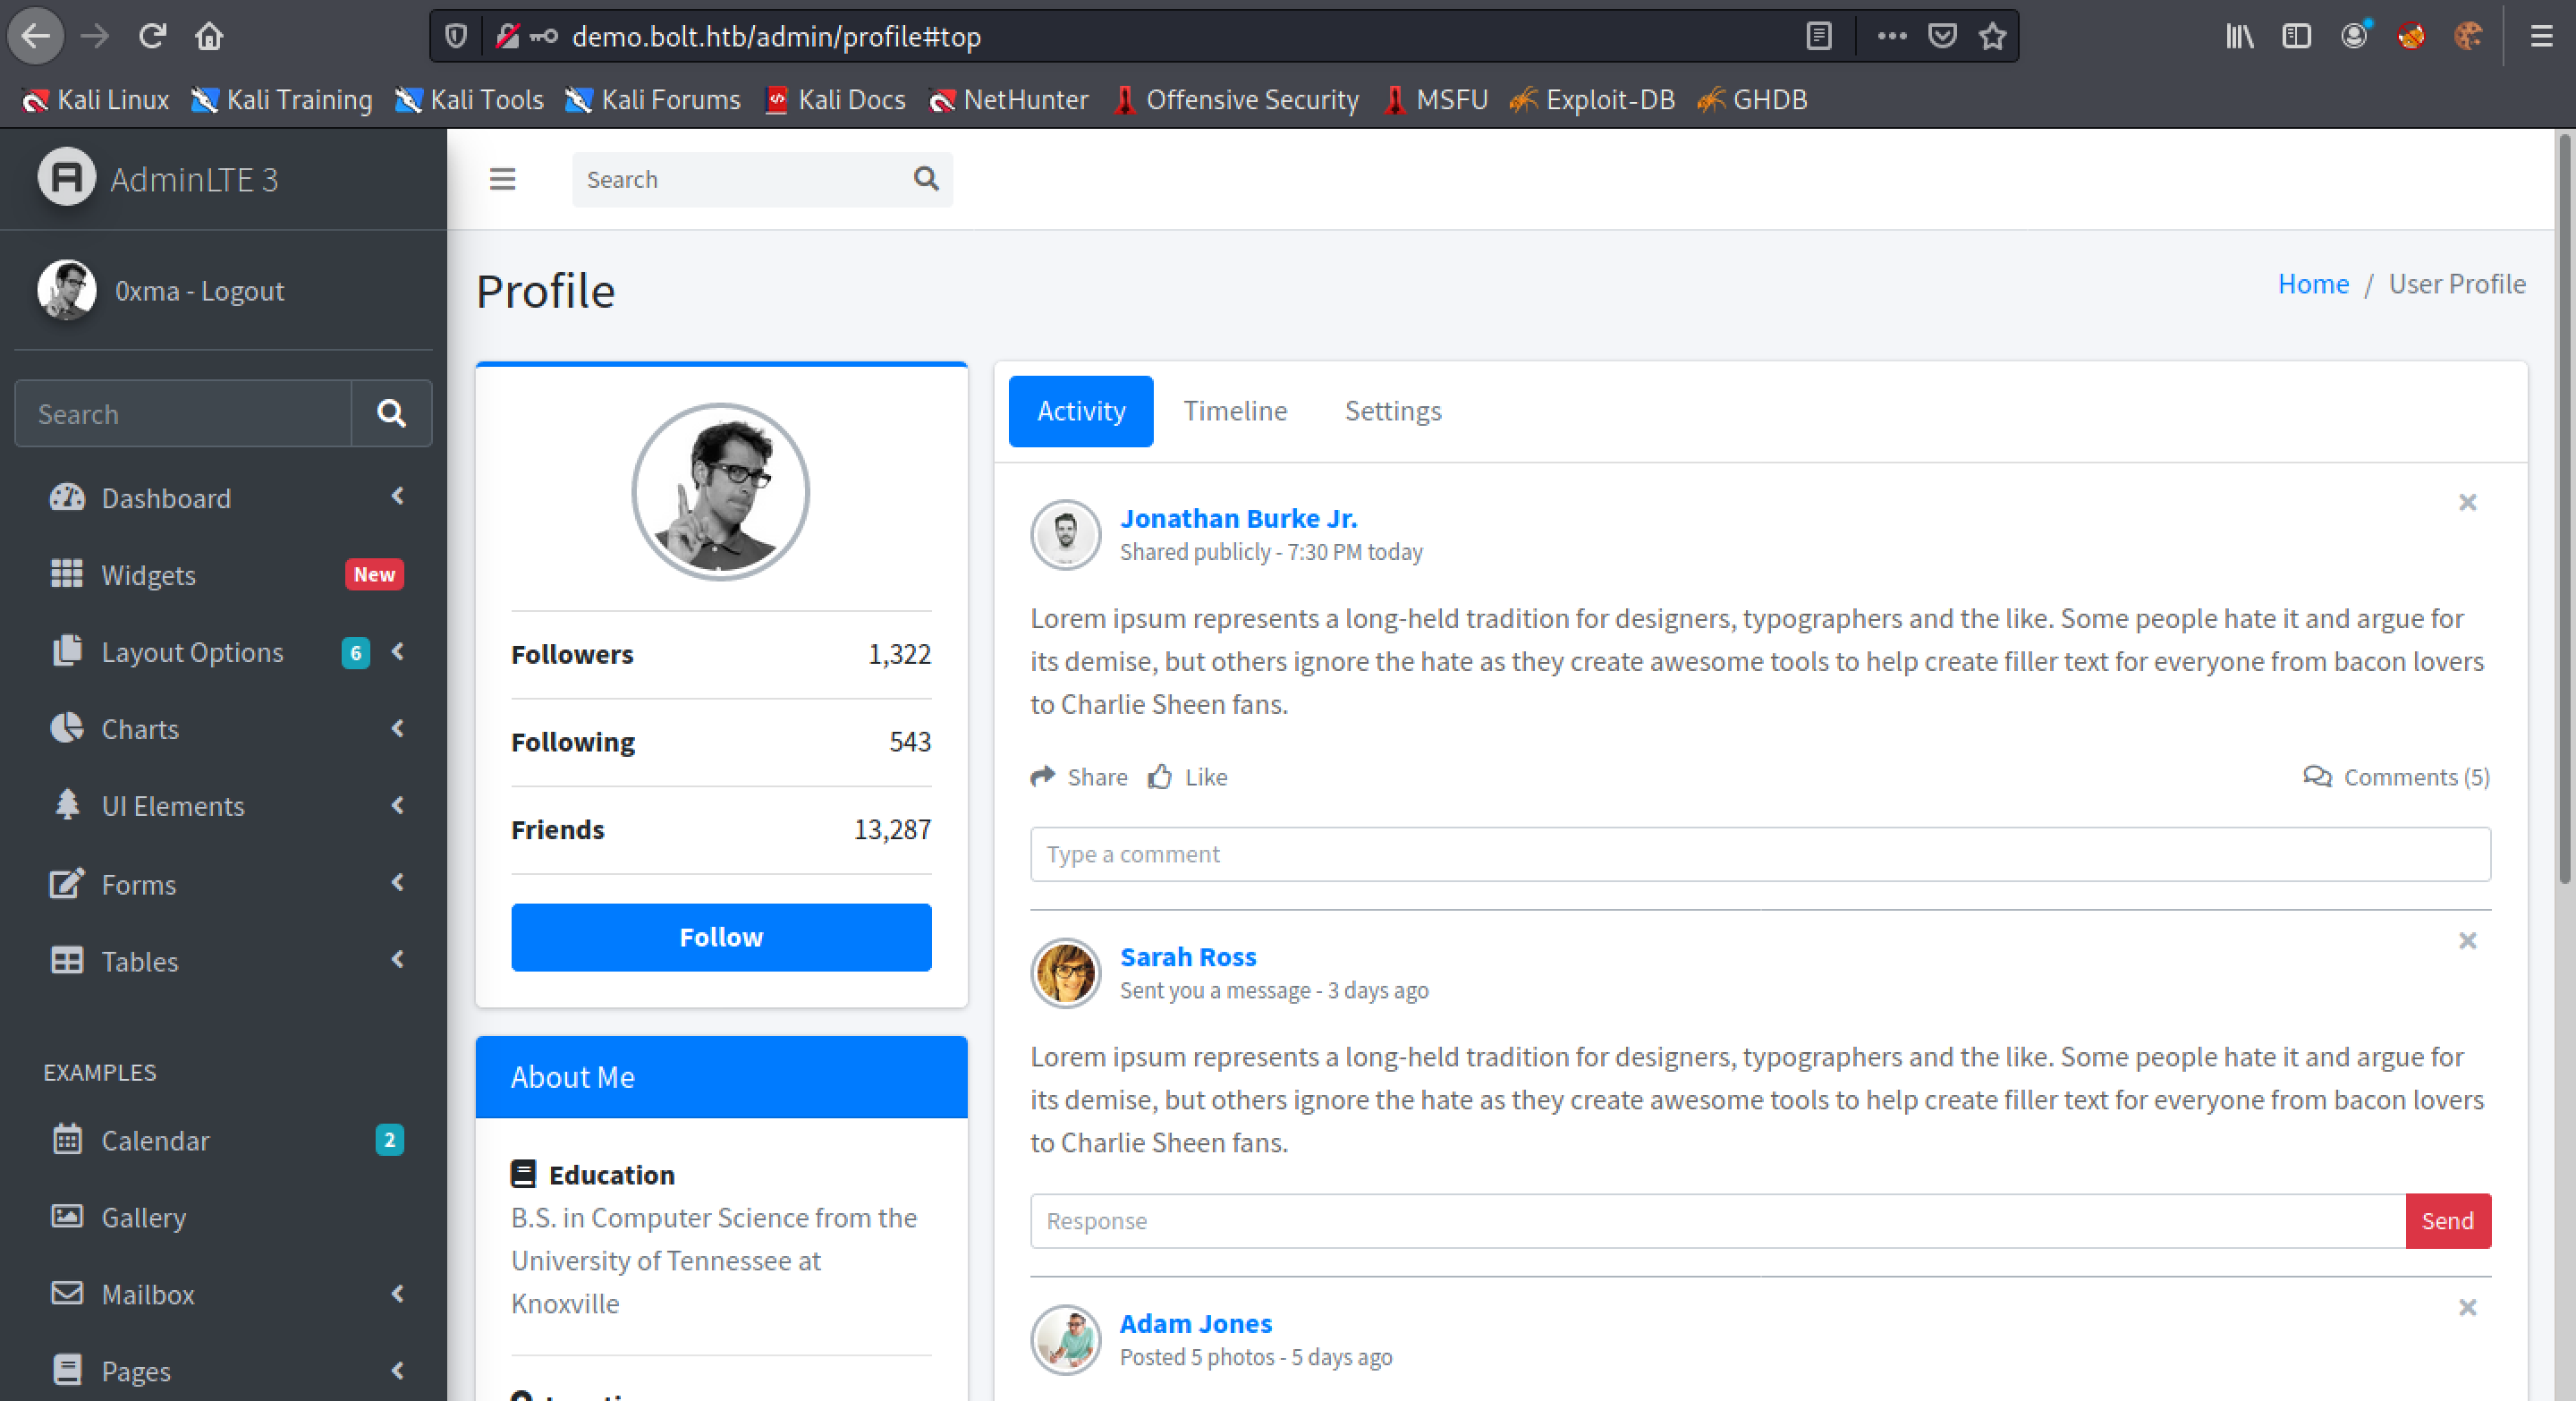 Profile page of a user.